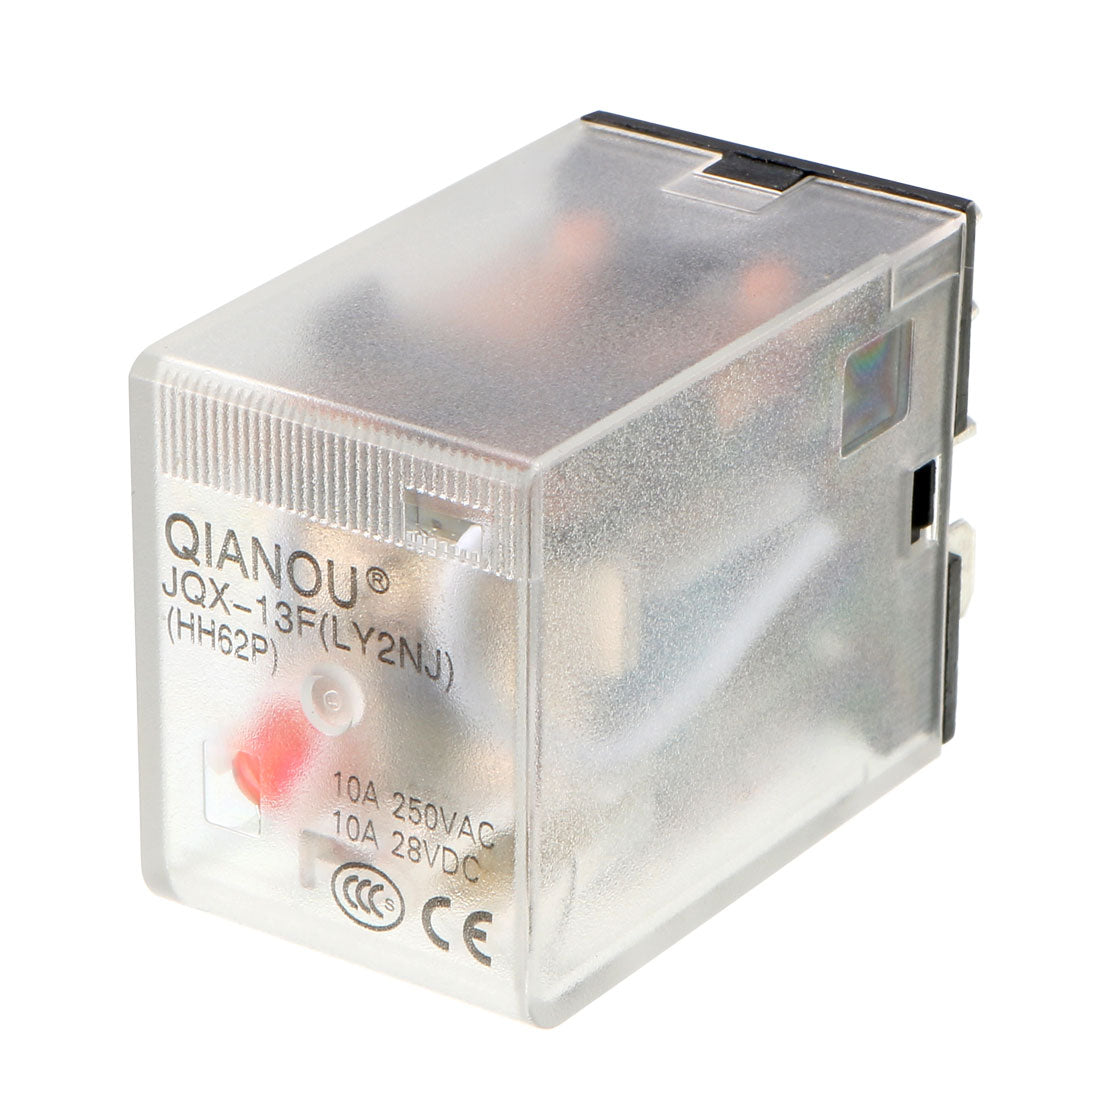 uxcell Uxcell AC110/120V Coil Red Indicator Light 8 Pin DPDT Electromagnetic General Purpose Power Relay + Socket Base JQX-13F